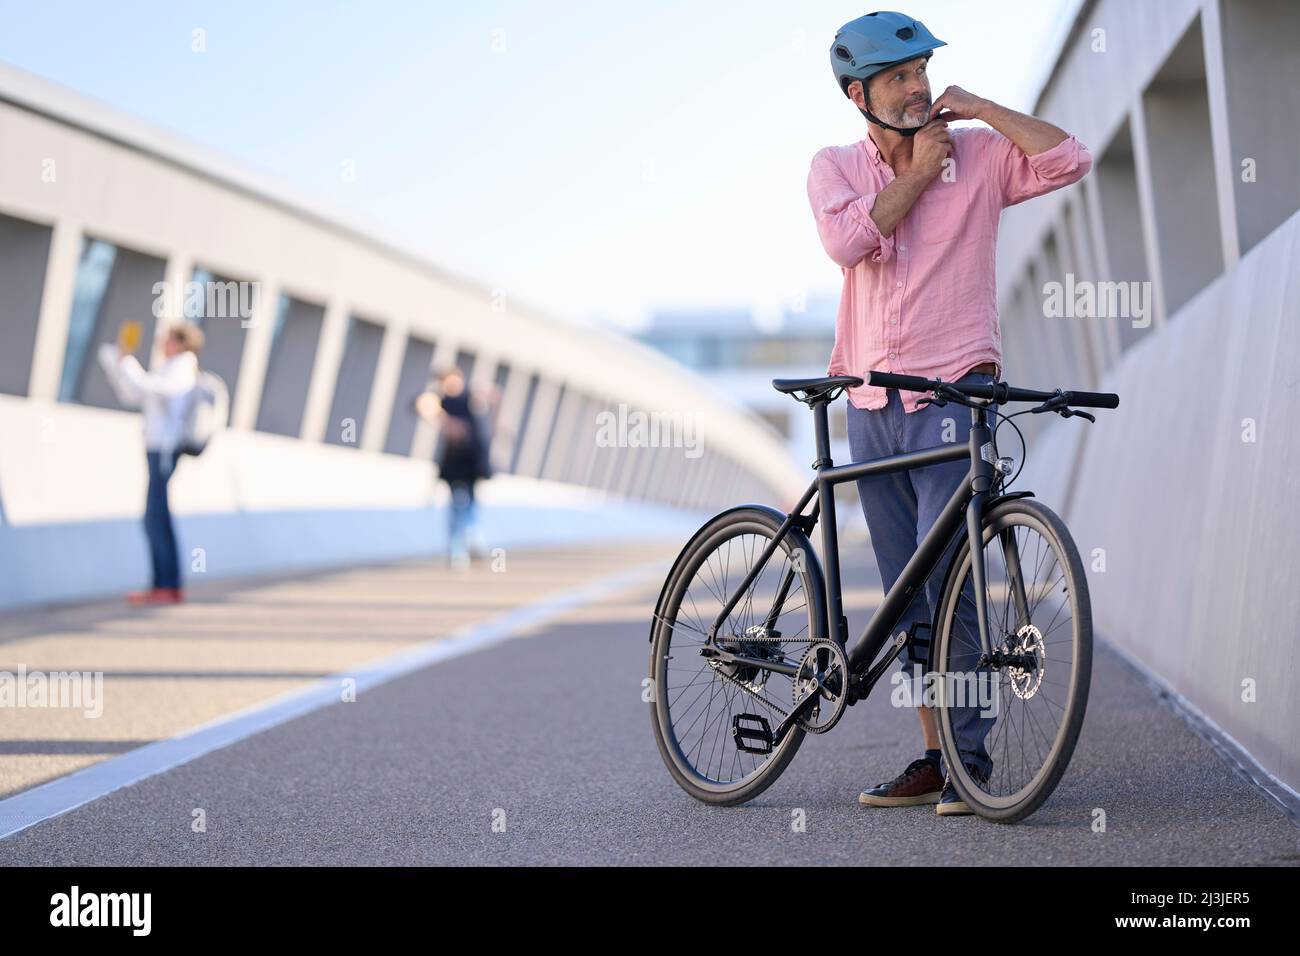 middle-aged man on bicycle, urban, Munich, Germany Stock Photo